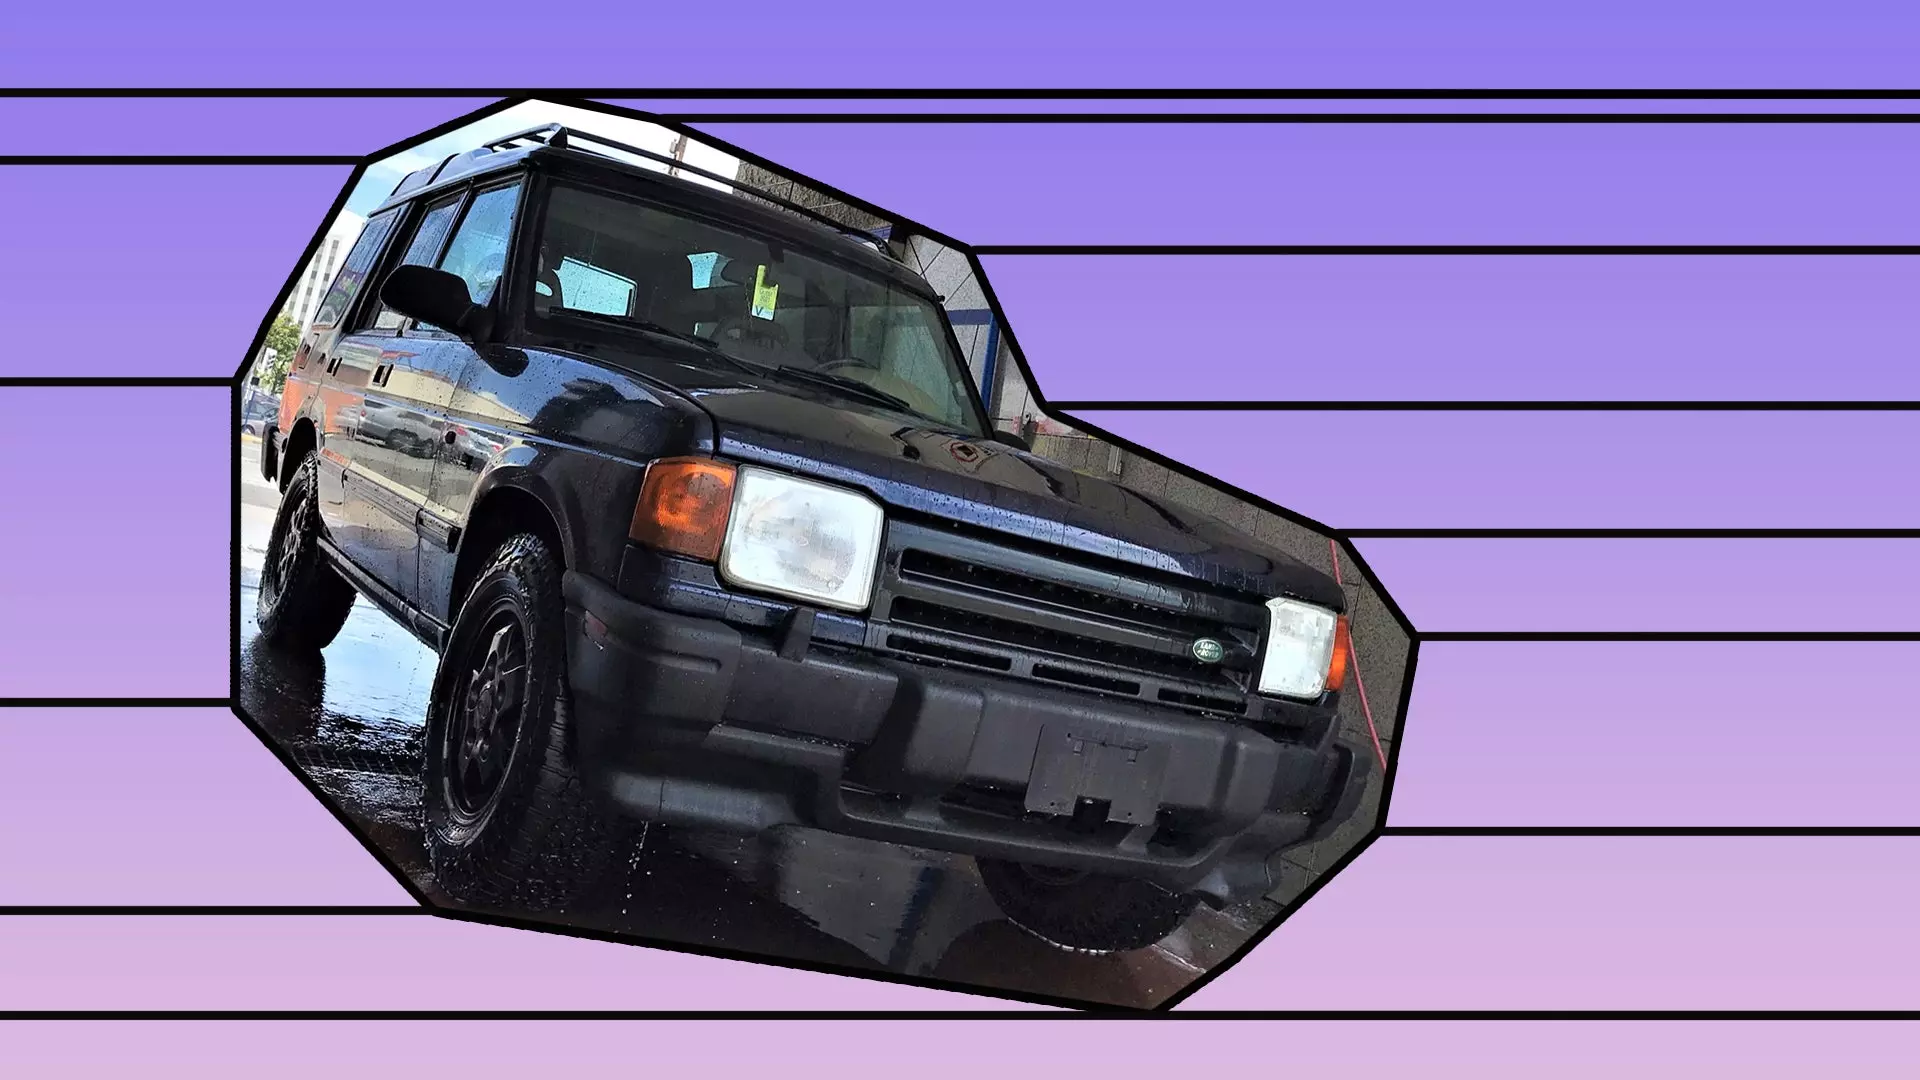 How I Made My Used Land Rover Discovery Look Presentable on a Dollar-Store Budget | Autance